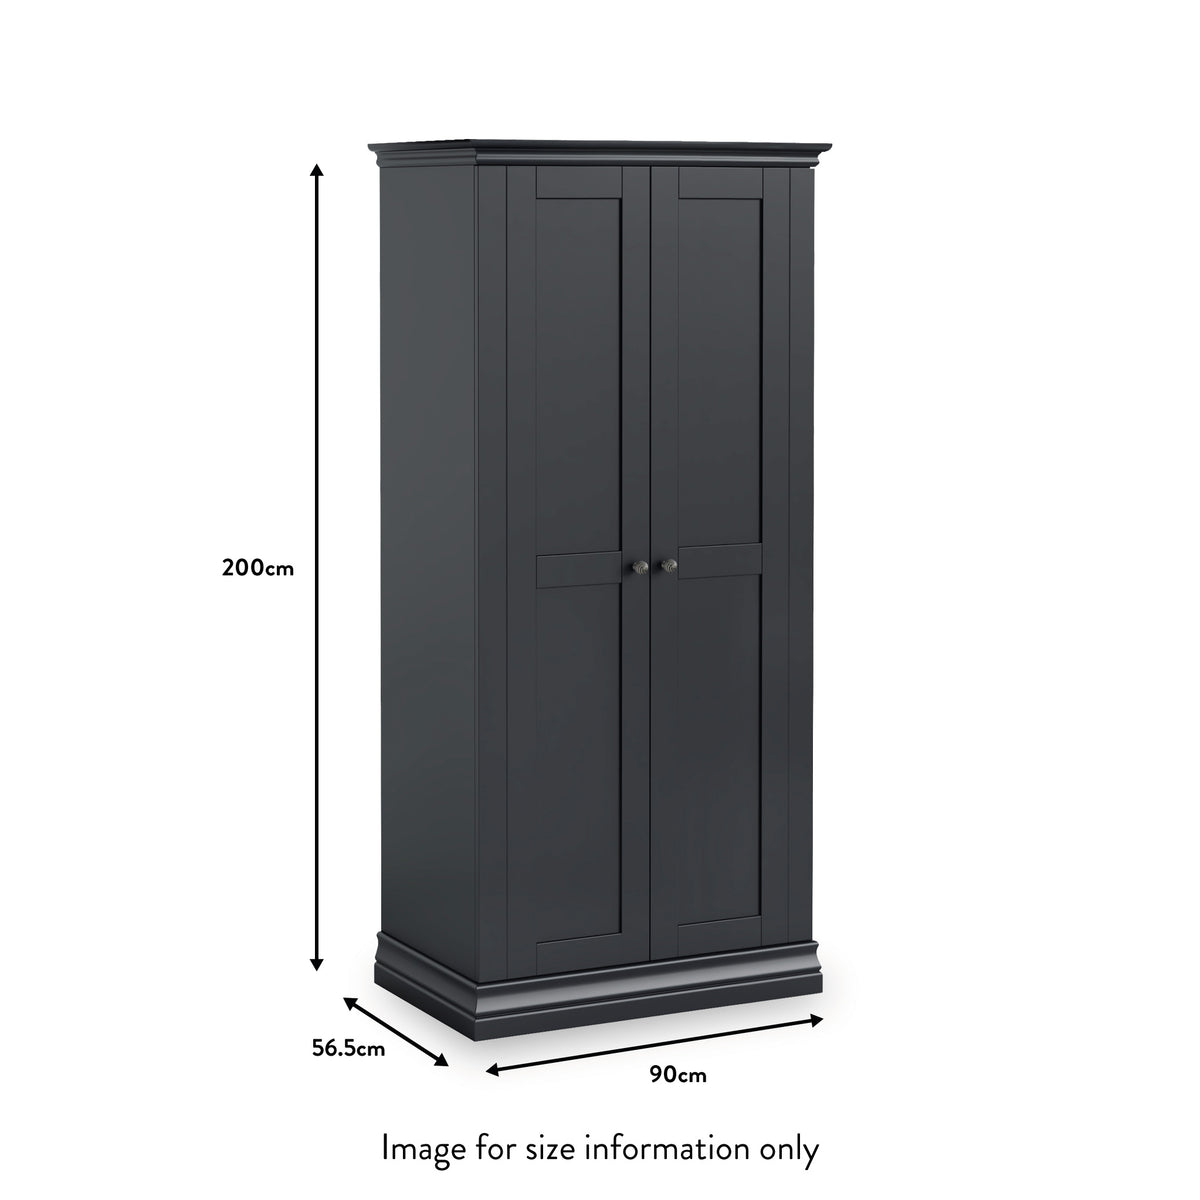 Porter Charcoal Full Hanging Double Wardrobe dimensions